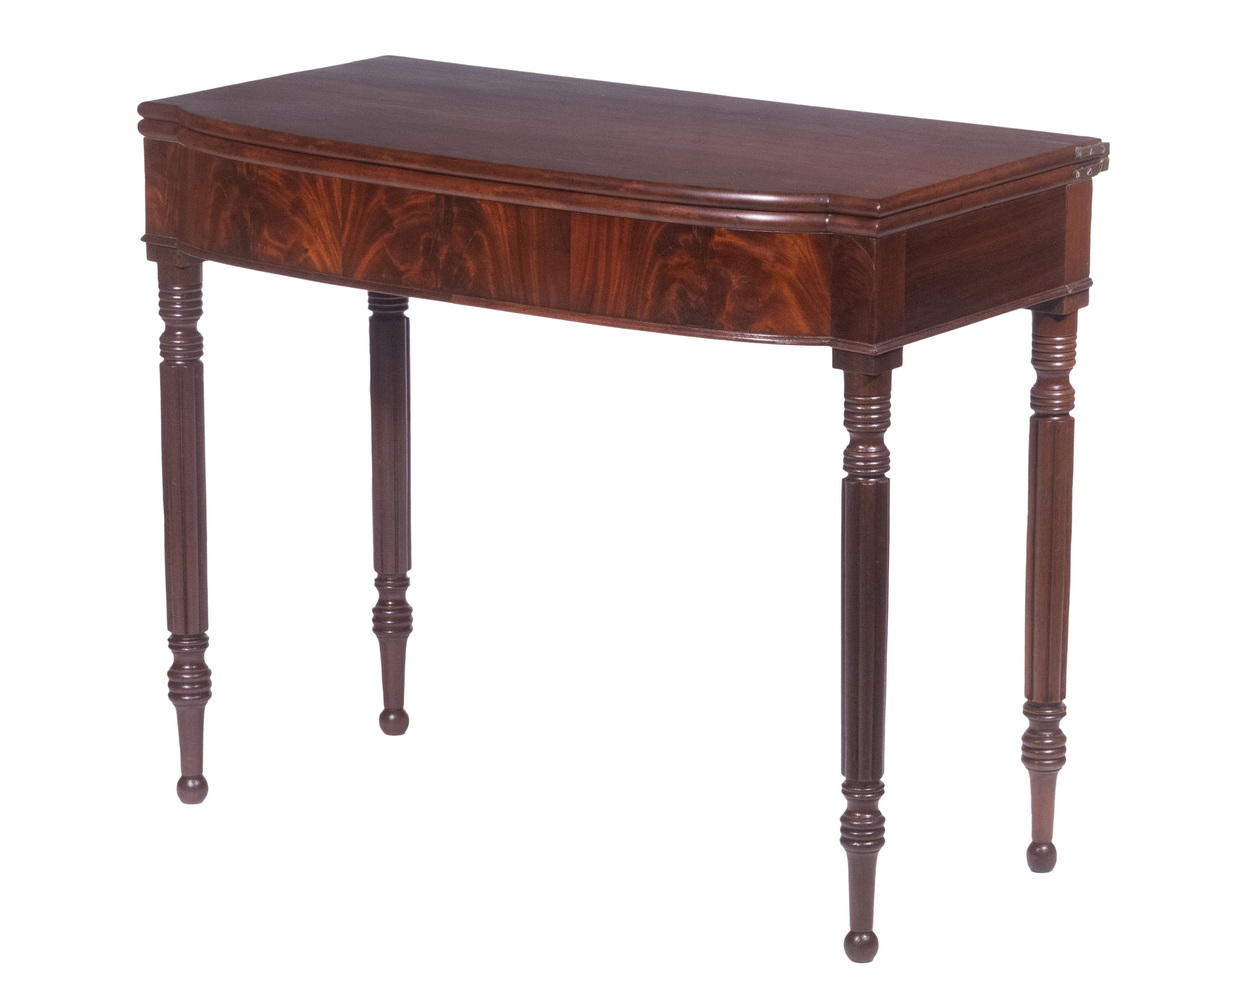 SHERATON CARD TABLE, ATTRIBUTED